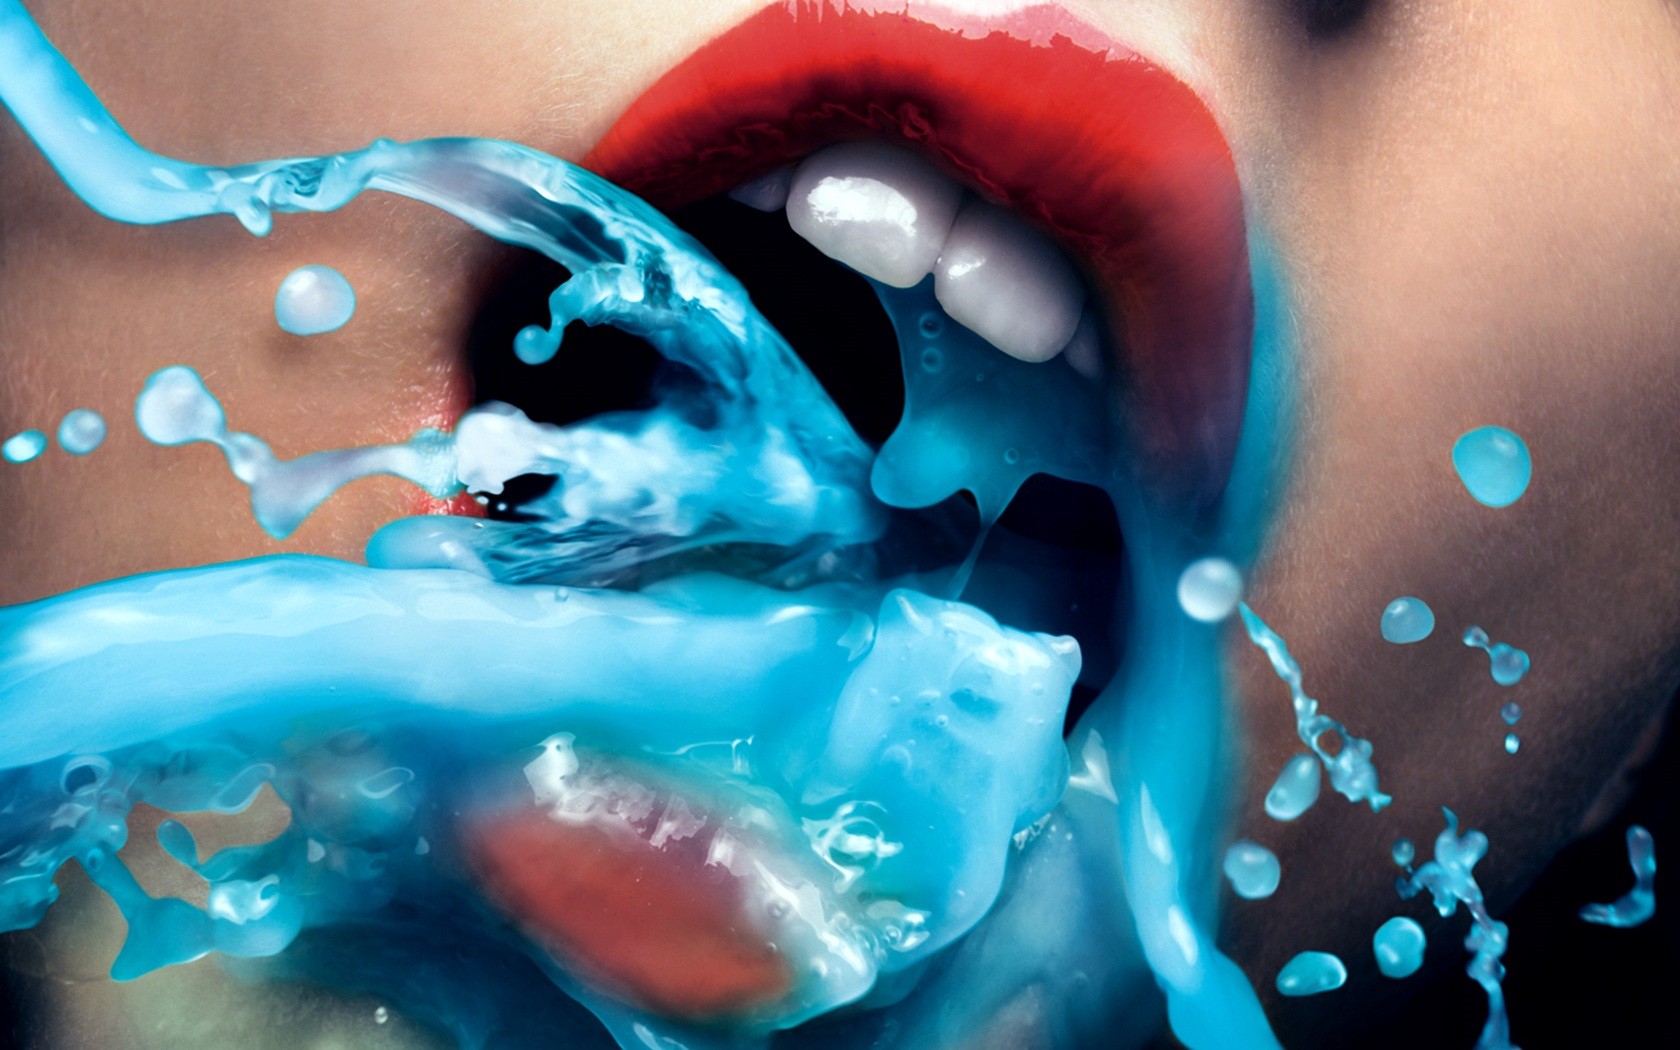 People 1680x1050 mouth closeup lips teeth red blue open mouth liquid red lipstick women model juicy lips cyan drinking problems